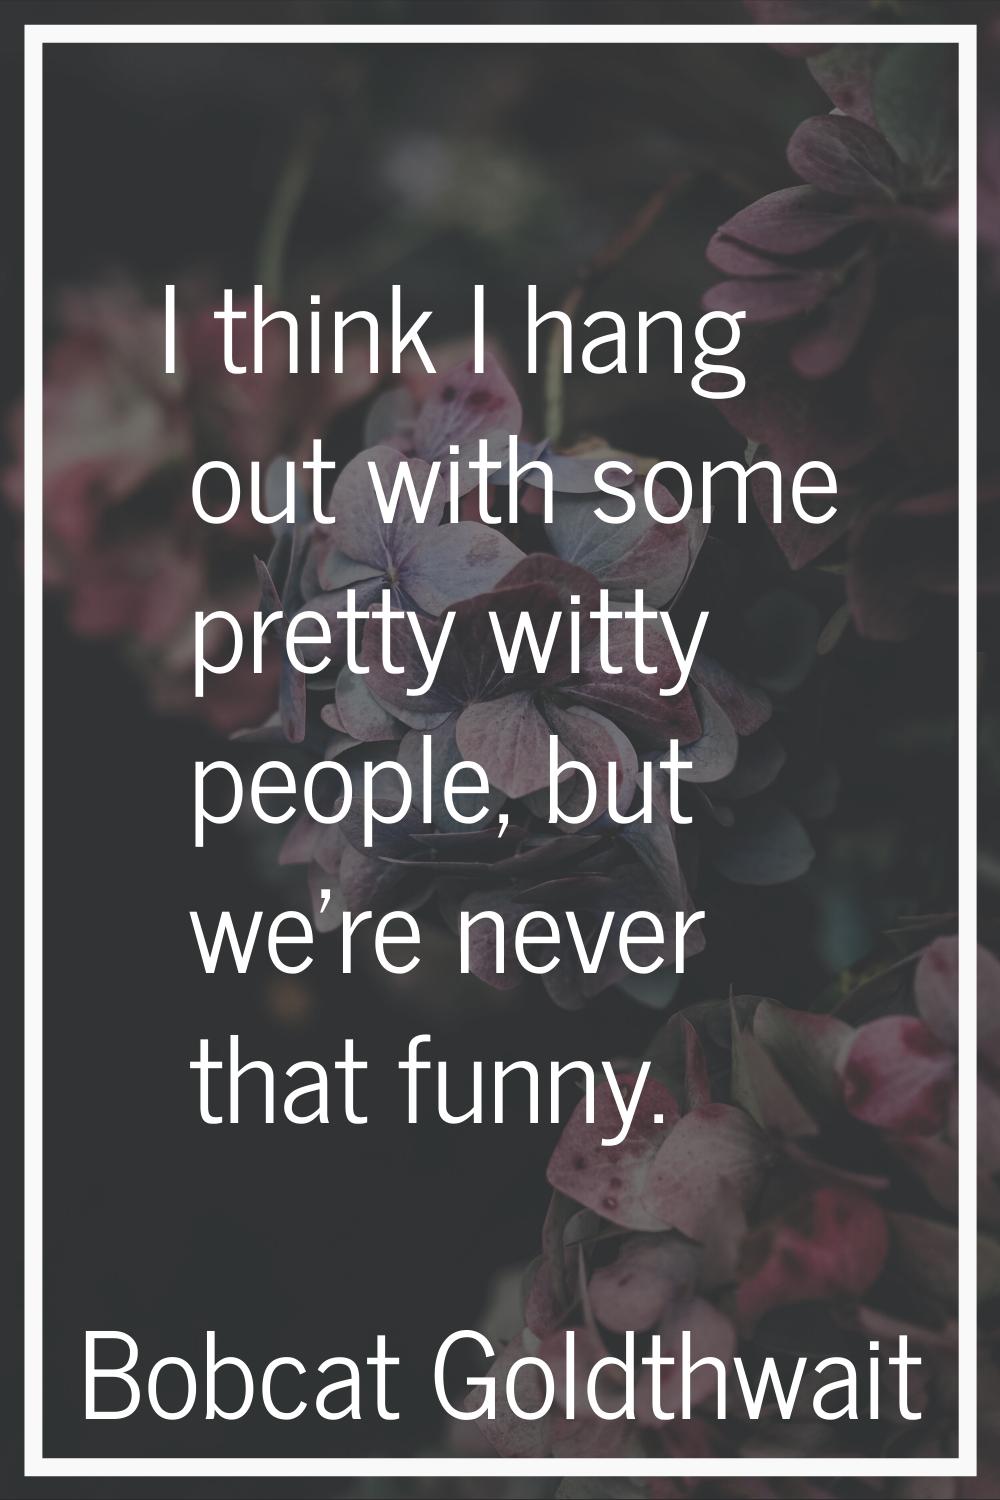 I think I hang out with some pretty witty people, but we're never that funny.